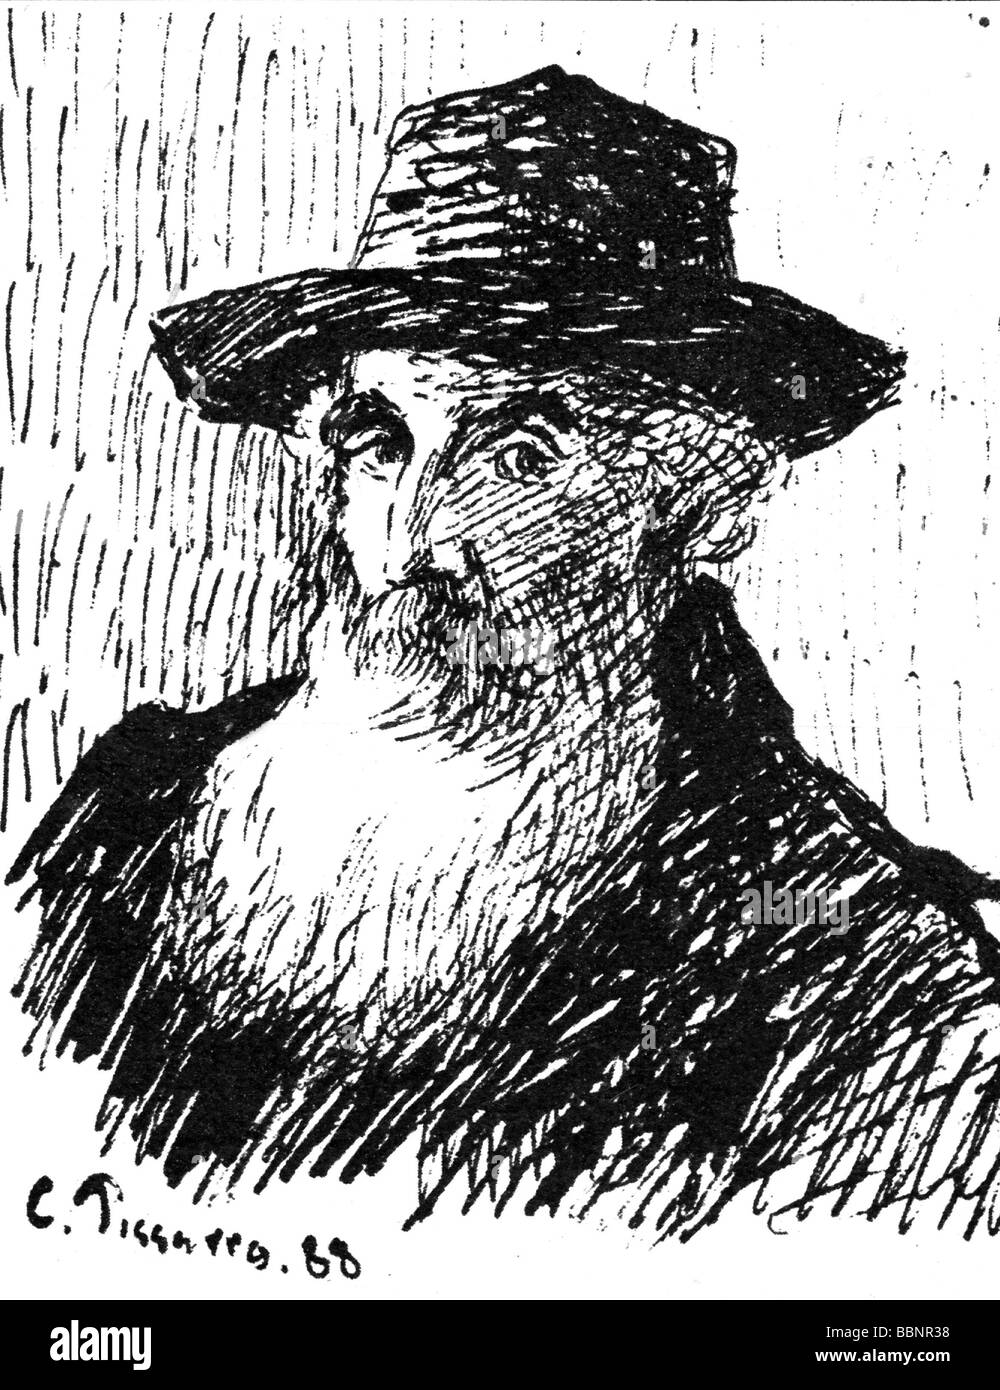 Pissarro, Camille, 10.7.1830 - 12.11.1903, French painter and graphic artist, portrait, self-portrait from the year 1888, charcoal drawing, , Stock Photo